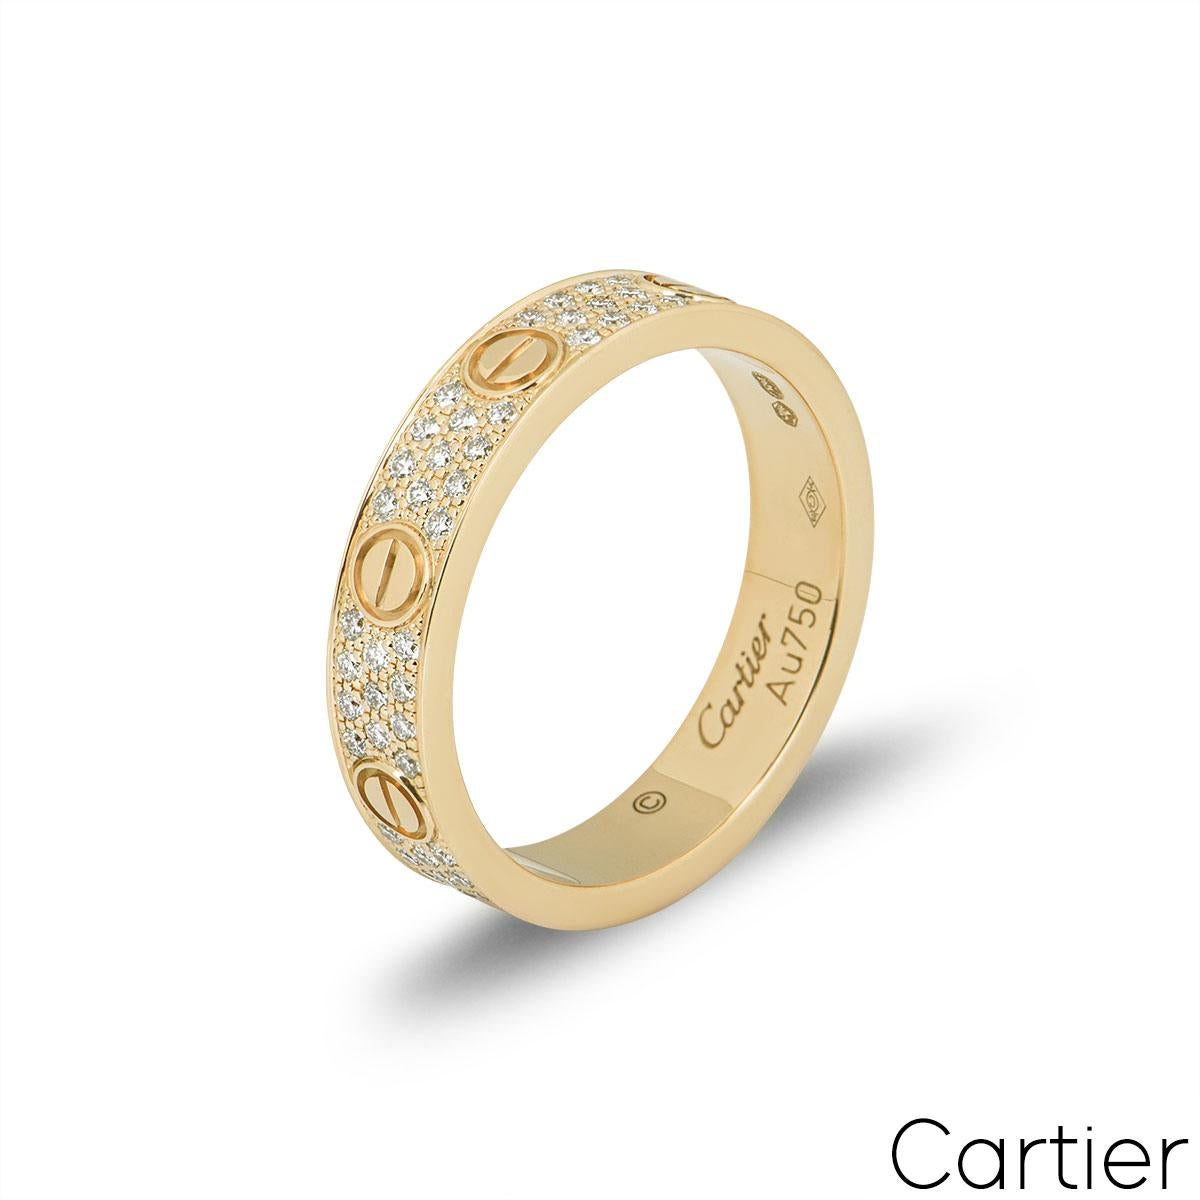 A 18k yellow gold diamond wedding ring by Cartier from the Love collection. The ring comprises of the iconic screw motifs displayed around the outer edges with 88 round brilliant cut diamonds pave set between each screw motif with a total diamond